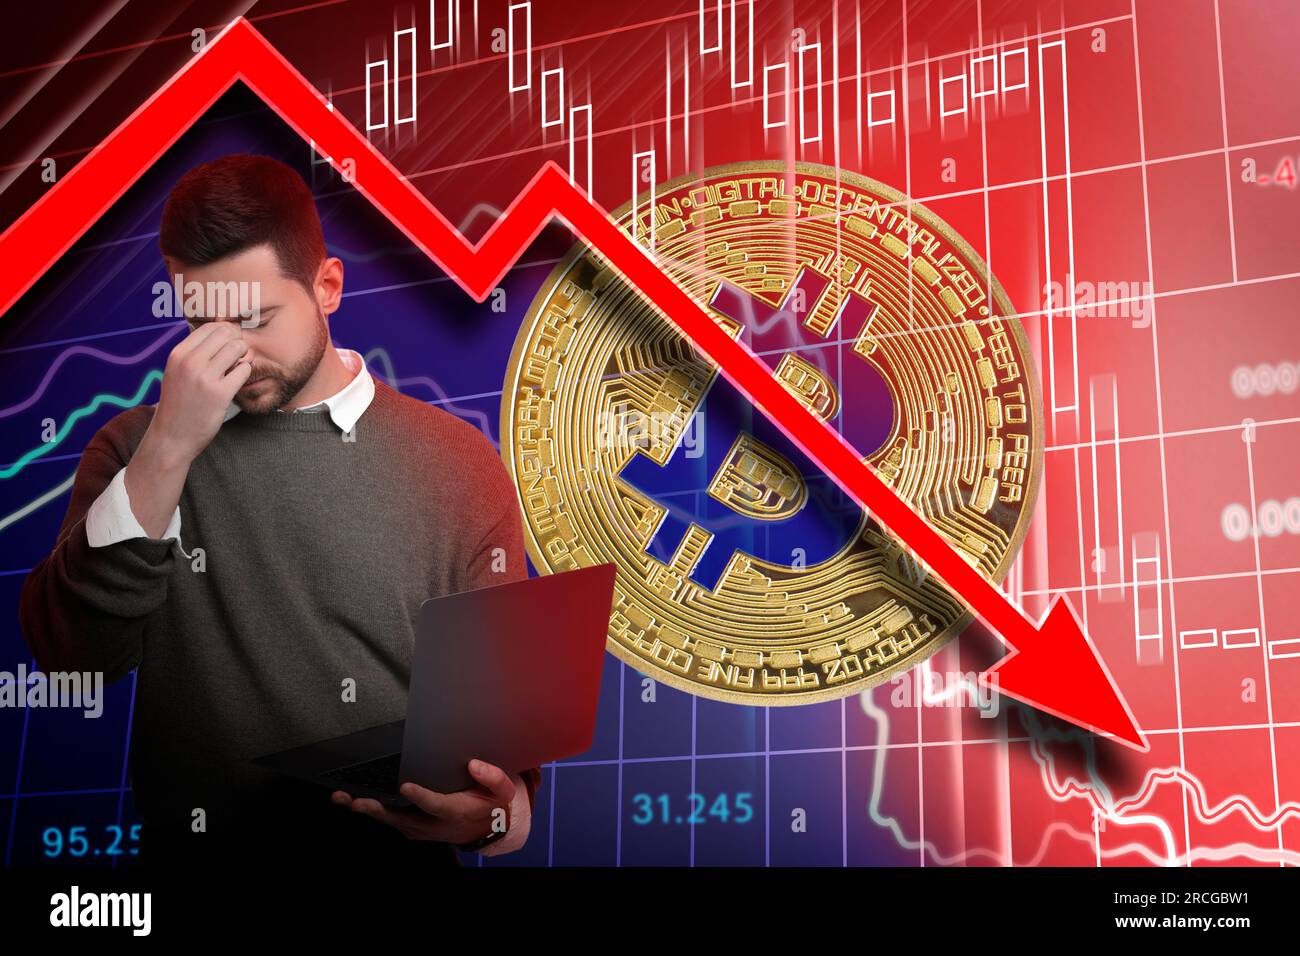 Cryptocurrency collapse. Collage with photo of stressed trader with laptop, bitcoin and data charts Stock Photo